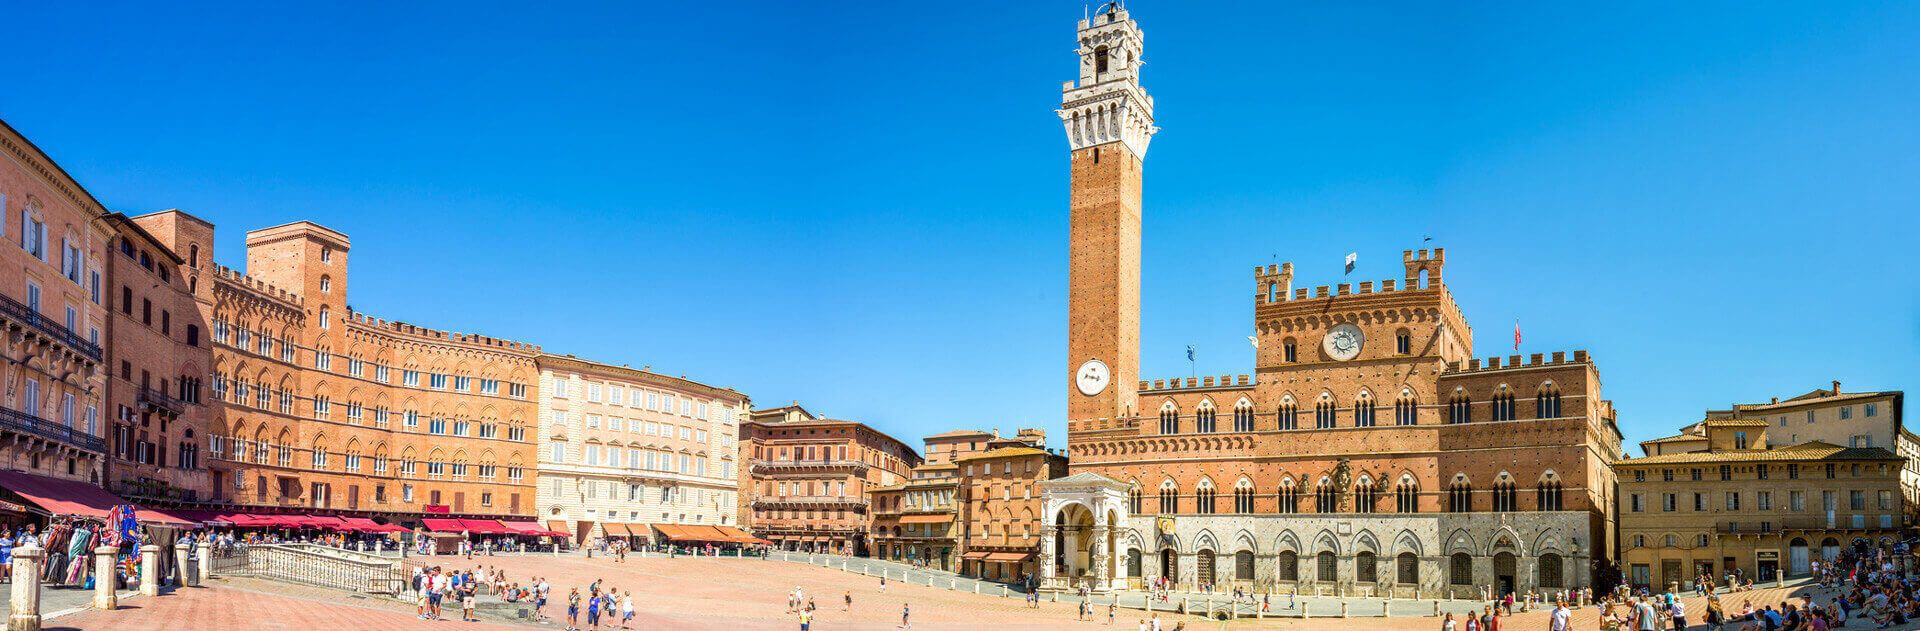 Day Tours in Siena, Tuscany: Best Citi Sights